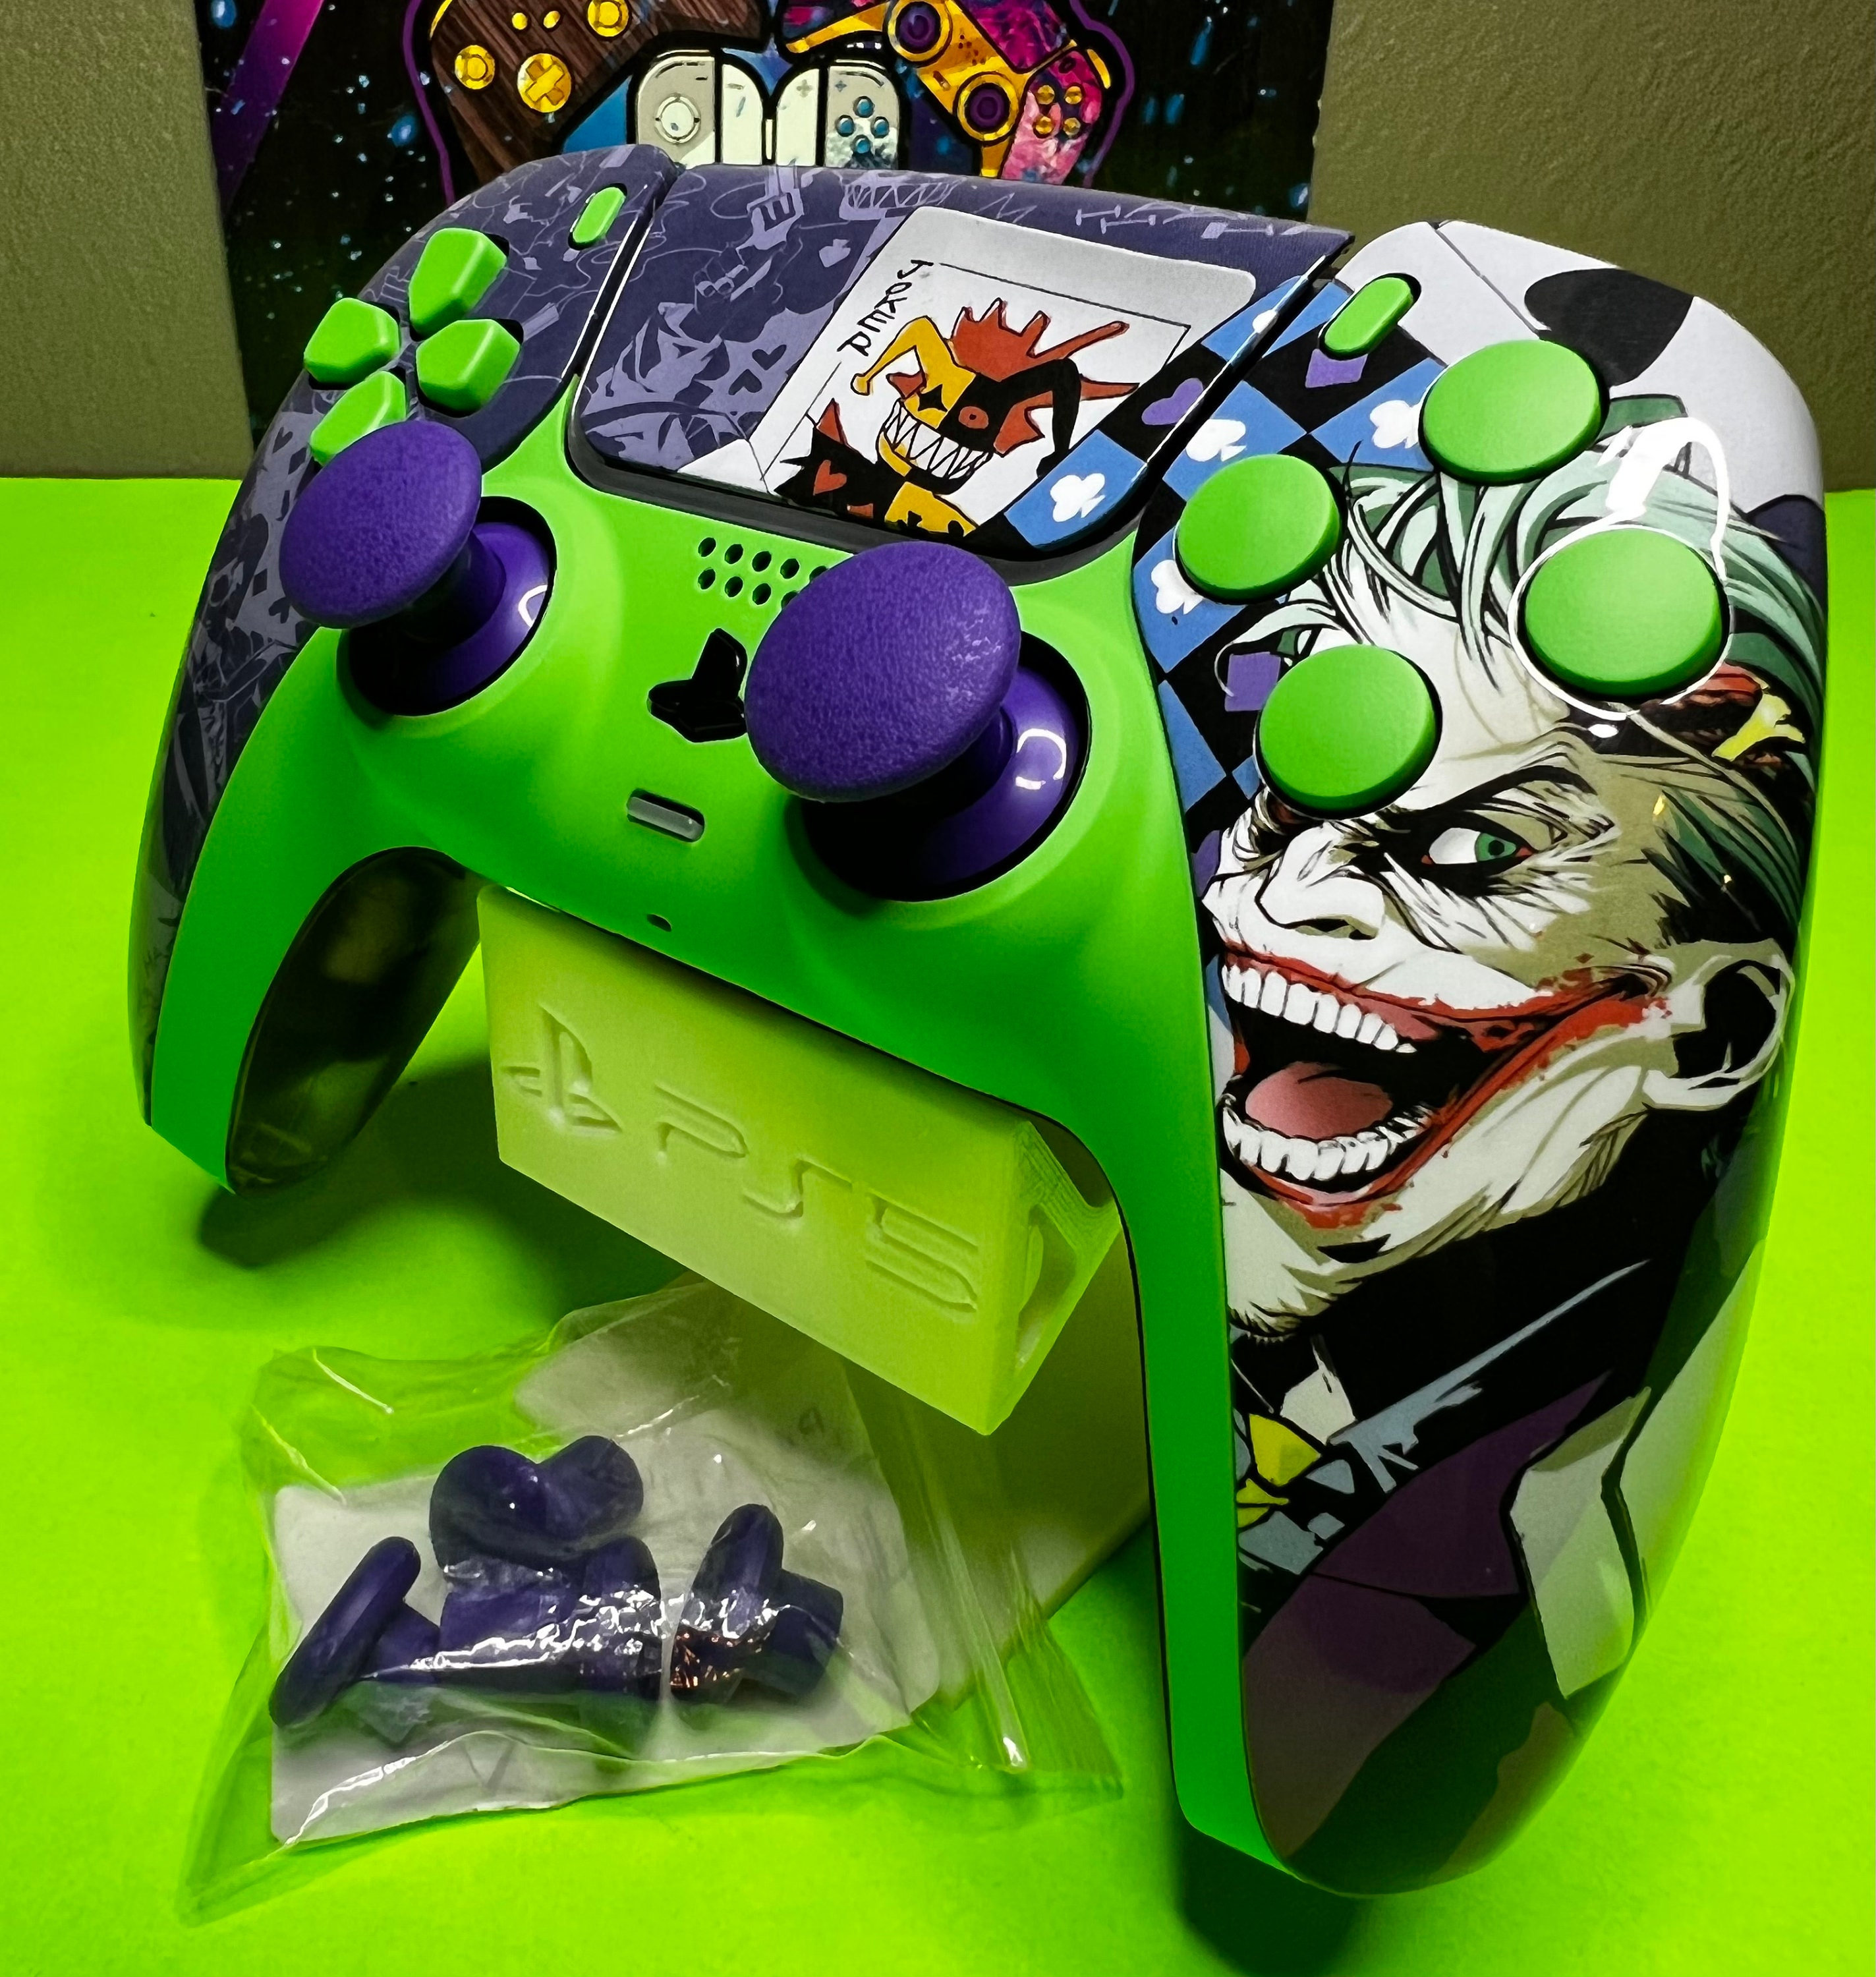 Tatum88 Ps5 Skin Disc Edition Anime Console And Controller Vinyl Cover Skins  Wraps Color StickerPs5 Skin Disc Edition Anime Console And Controller Vinyl Cover  Skins Wraps Color Sticker  Walmart Canada